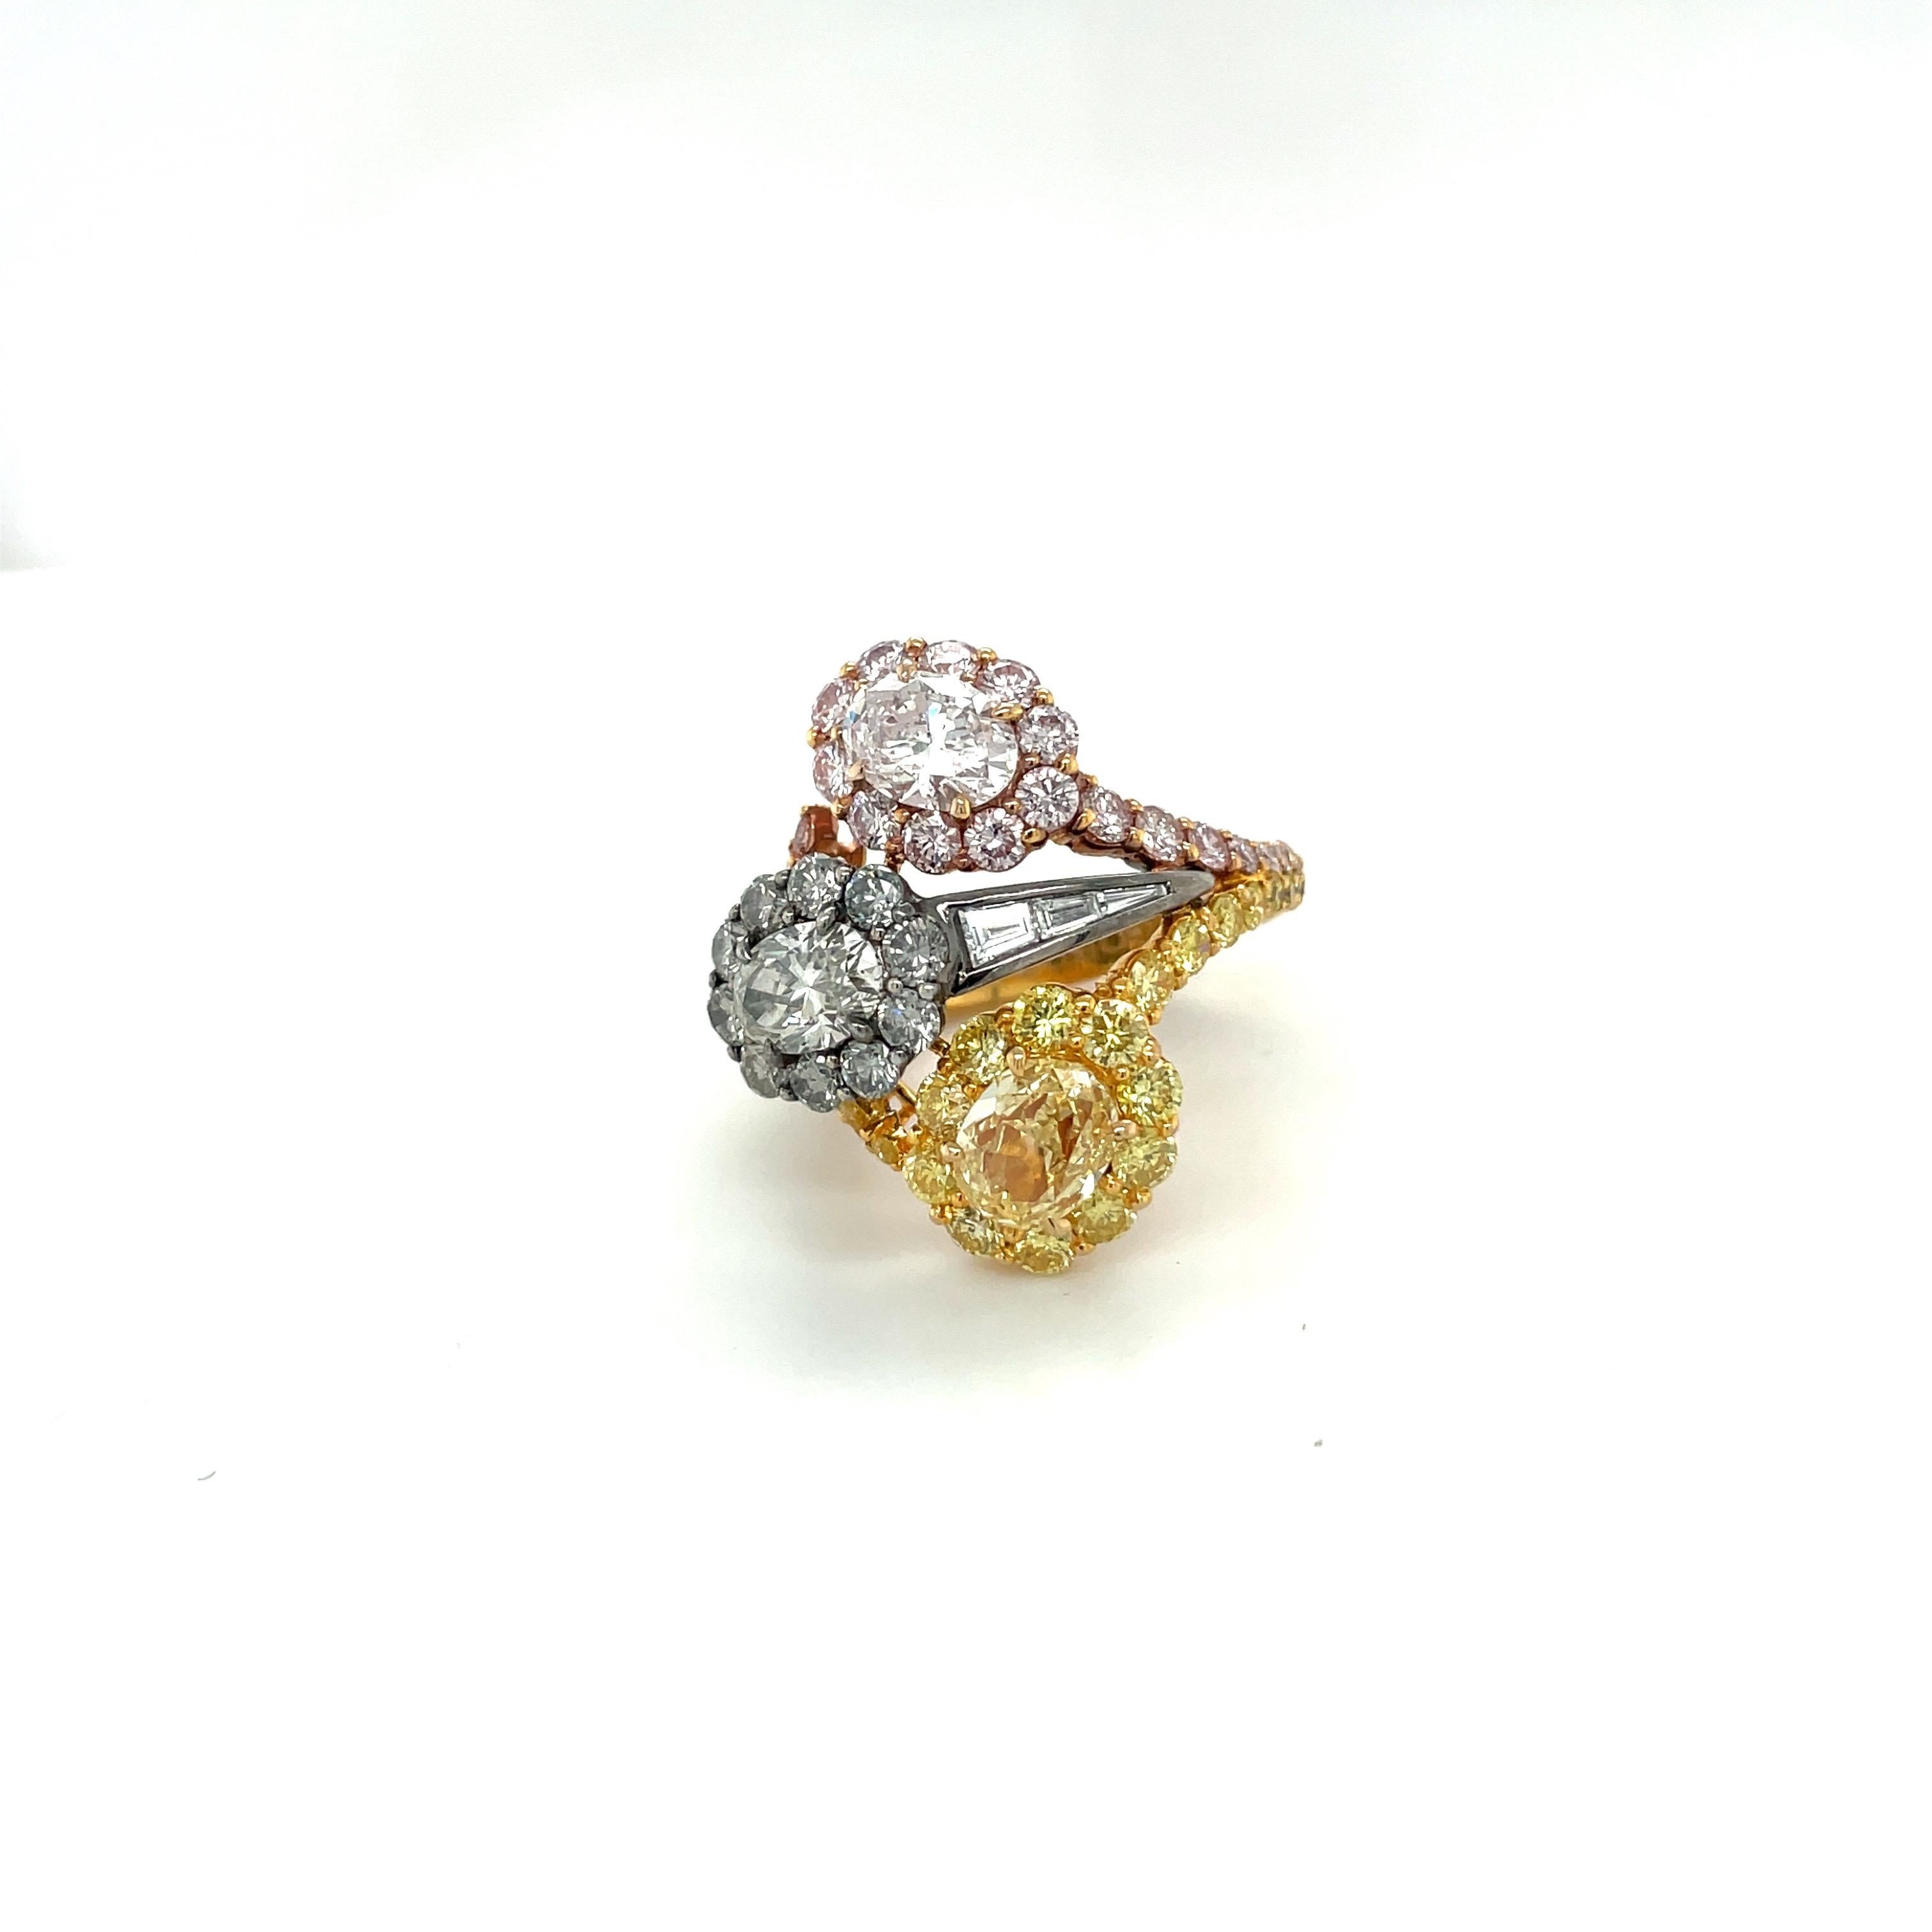 Natural fancy light yellow, faint pink and vivid gray oval diamonds are surrounded by fancy round yellow,
pink and gray diamonds. Set in a platinum and 18-karat yellow and rose gold. This magnificent ring is accompanied by 3 GIA